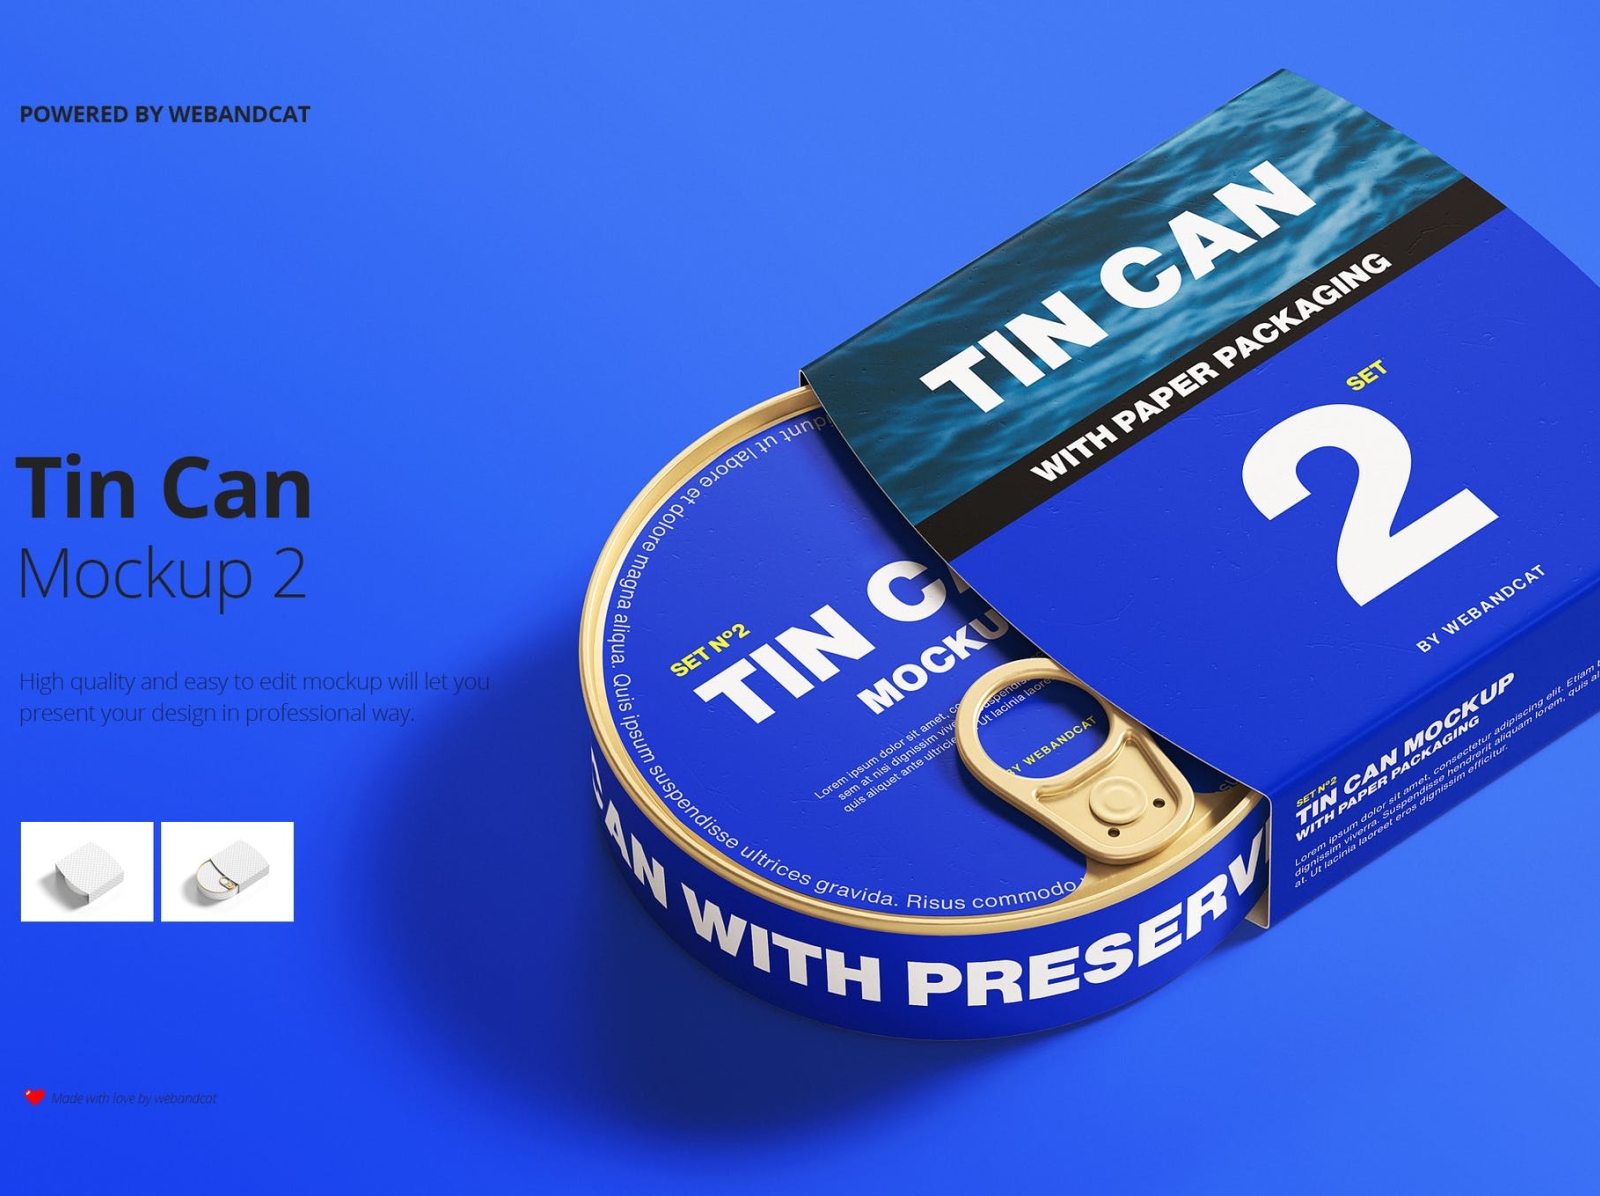 Tin Can Mockup with Paper Packaging 3d branding can mockup design graphic design illustration logo mockup package design packaging packaging design paper packaging tin can typography ui ux vector